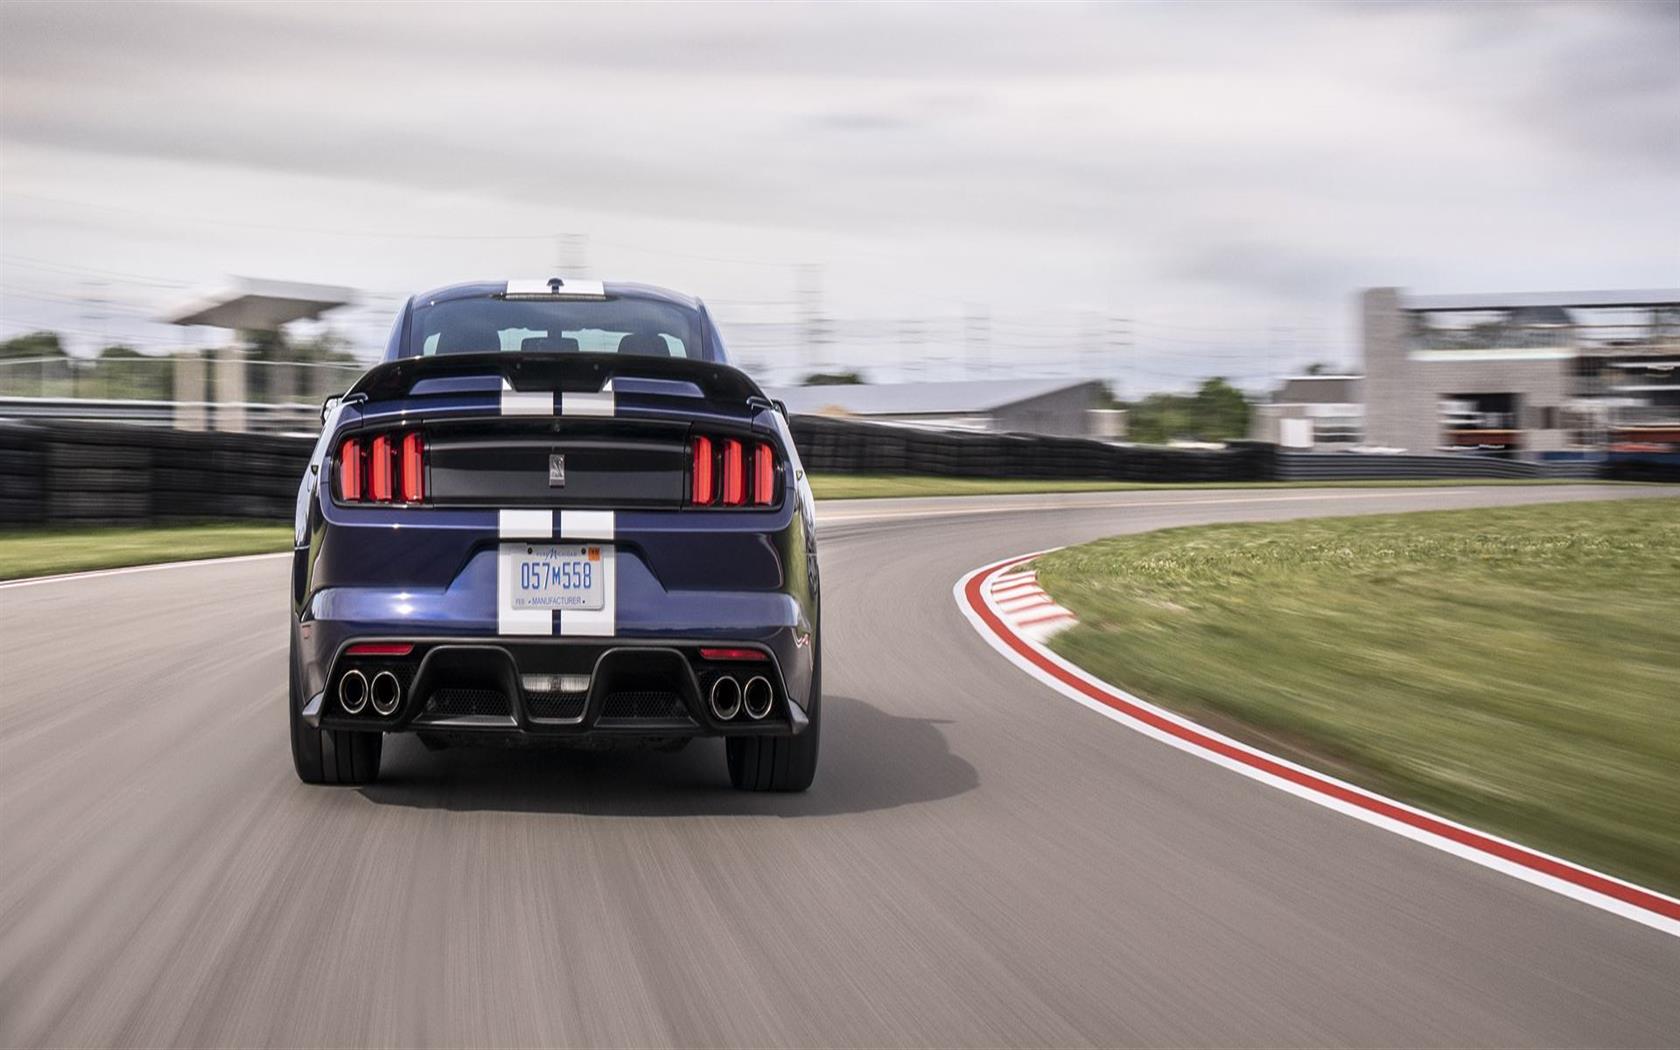 2019 Shelby Mustang GT350